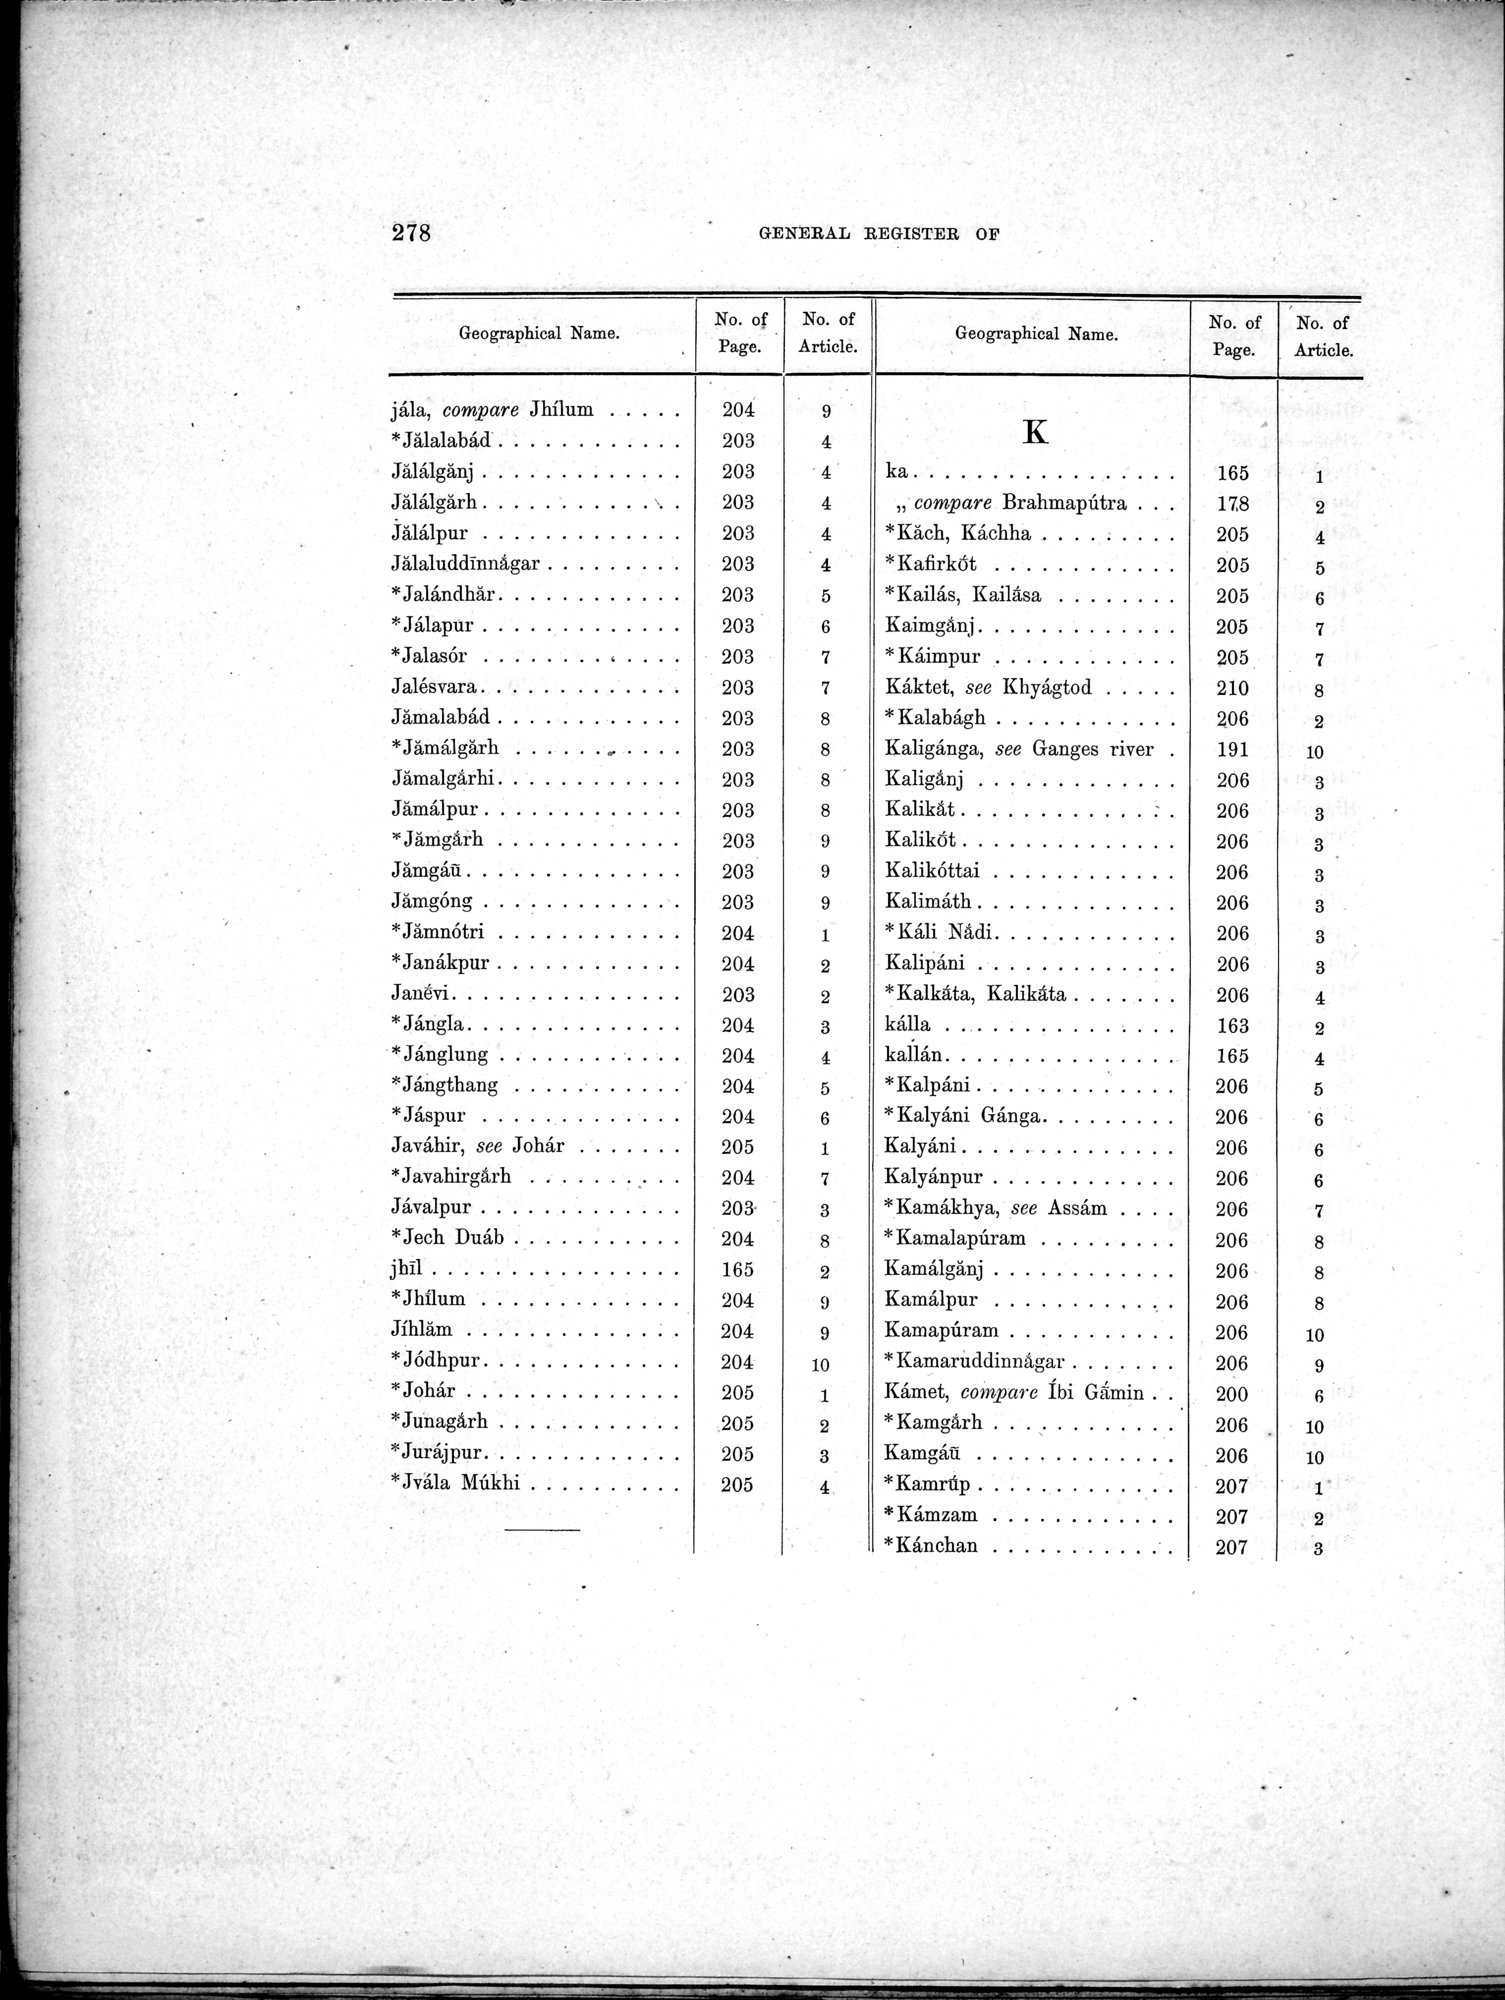 Results of a Scientific Mission to India and High Asia : vol.3 / Page 310 (Grayscale High Resolution Image)